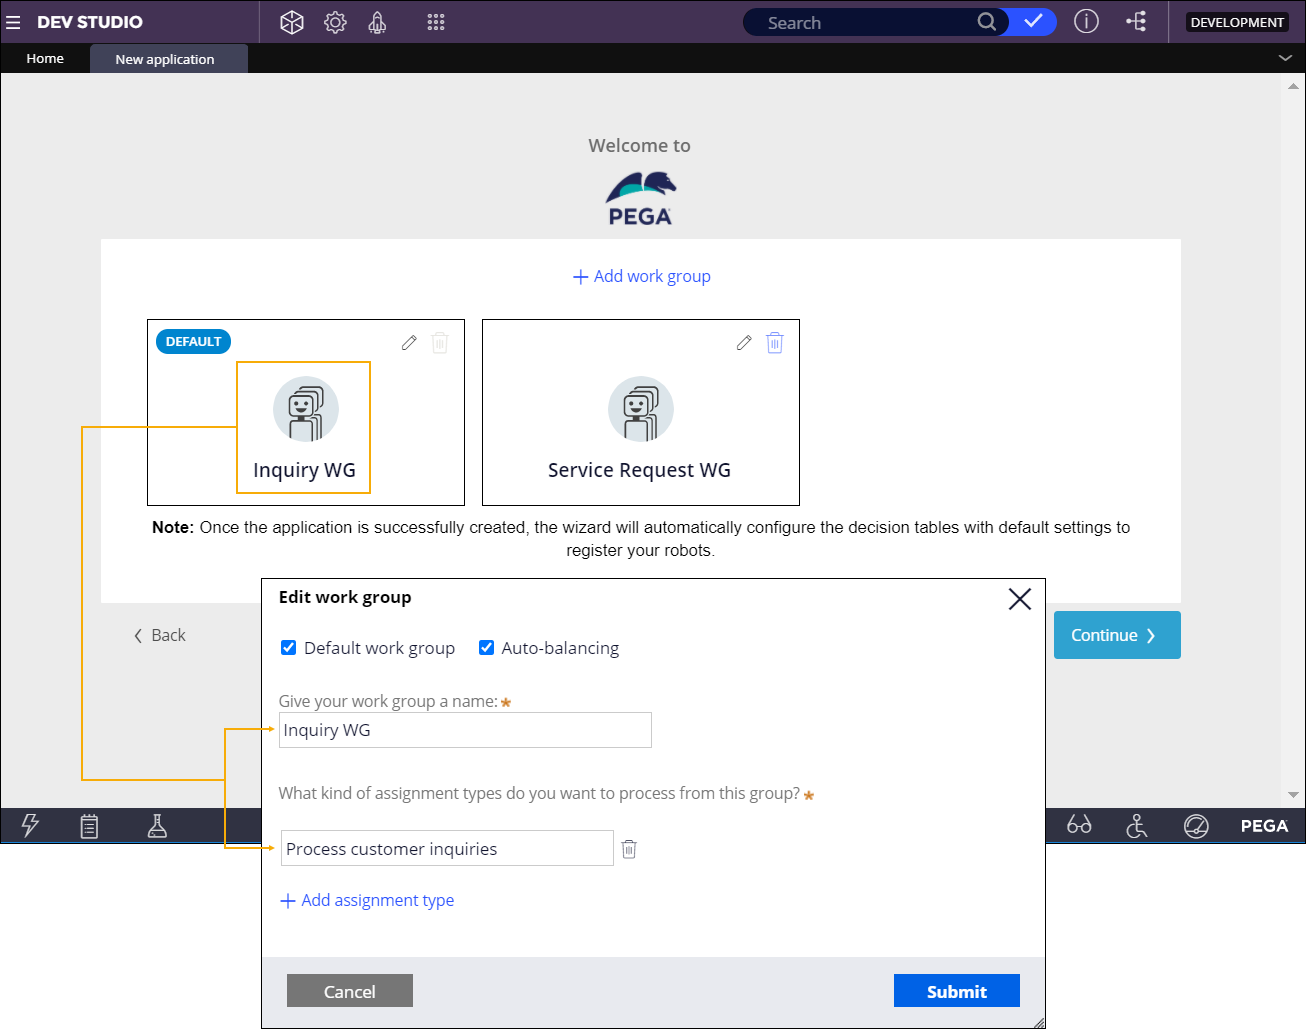 Creating robotic work groups and asignment
                                                  types through the New Application Wizard